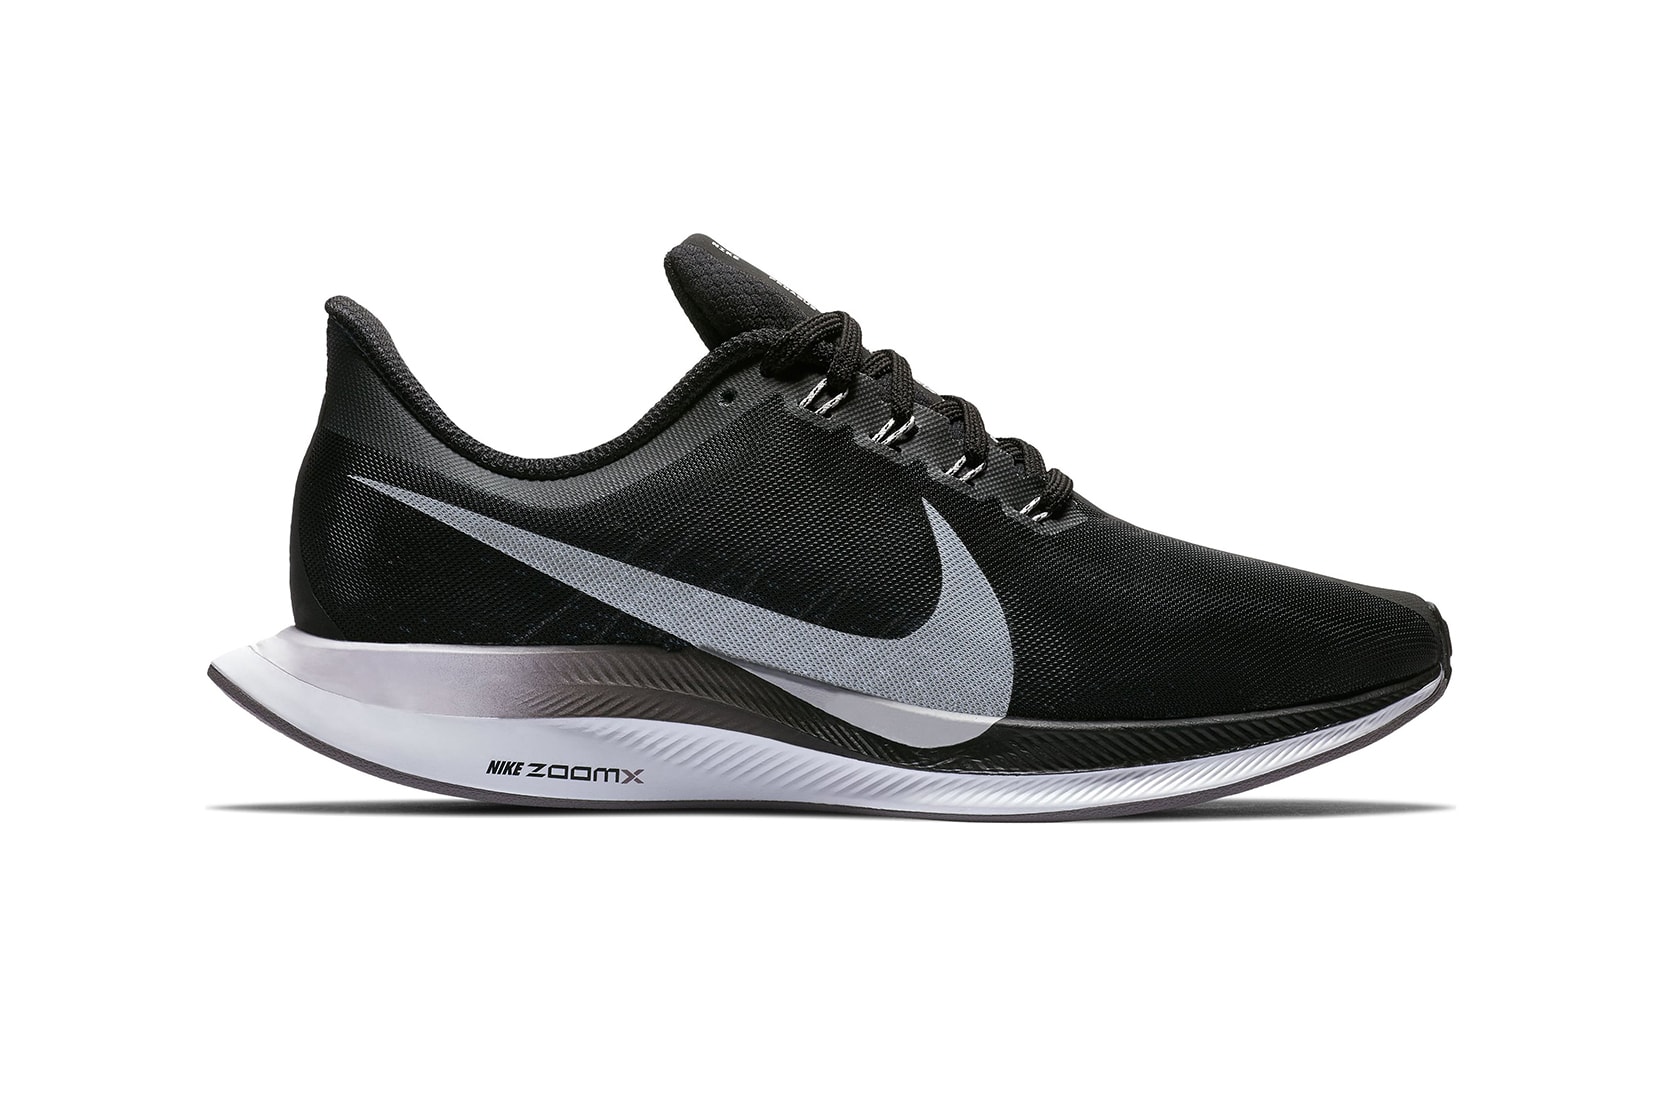 Nike Zoom Pegasus Turbo Black Silver Colorway Release Date Details Kicks Shoes Trainers Sneakers Footwear Available Cop Purchase Soon